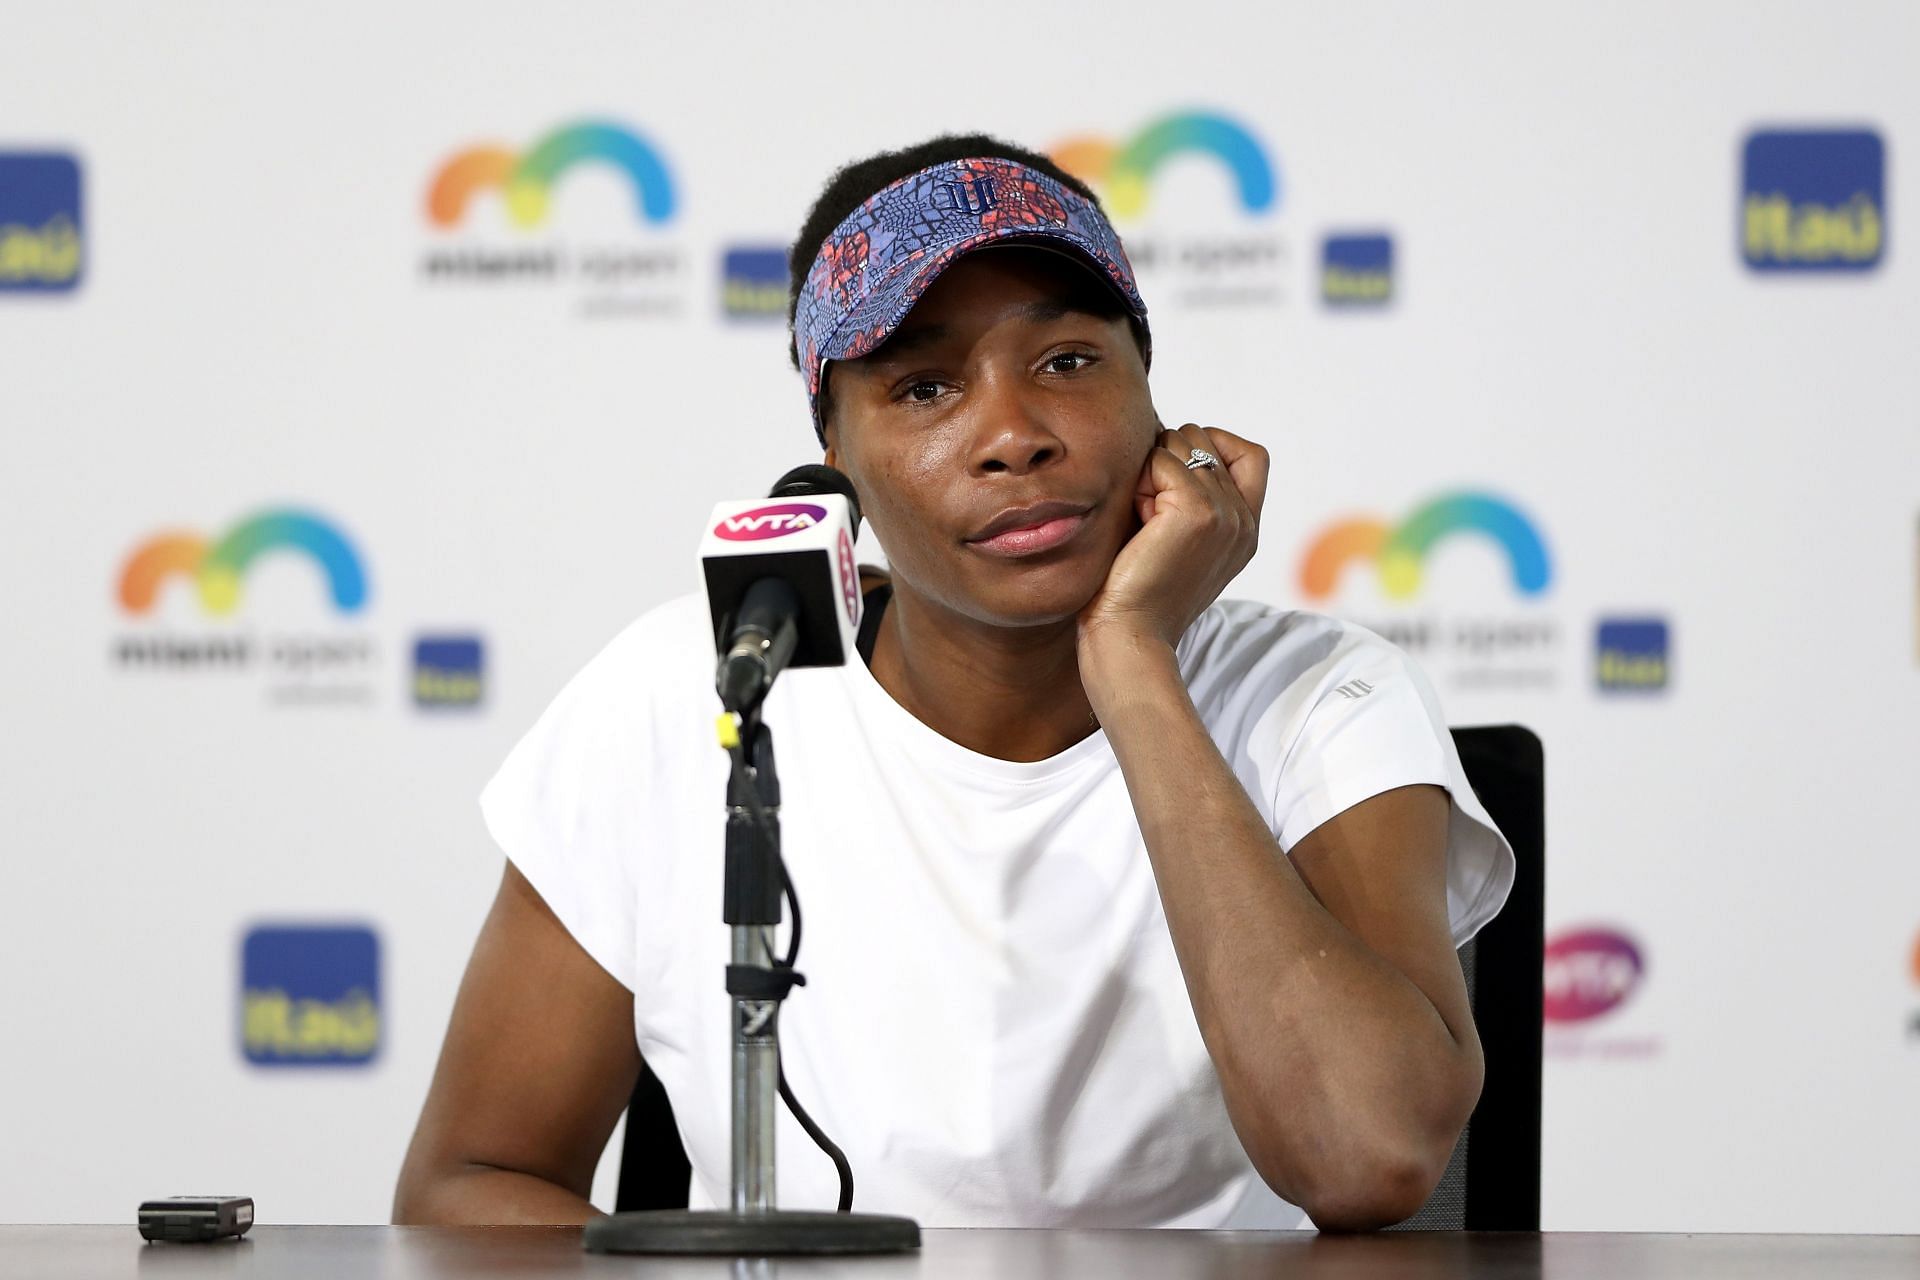 Venus Williams spoke about her interest in the digital space.